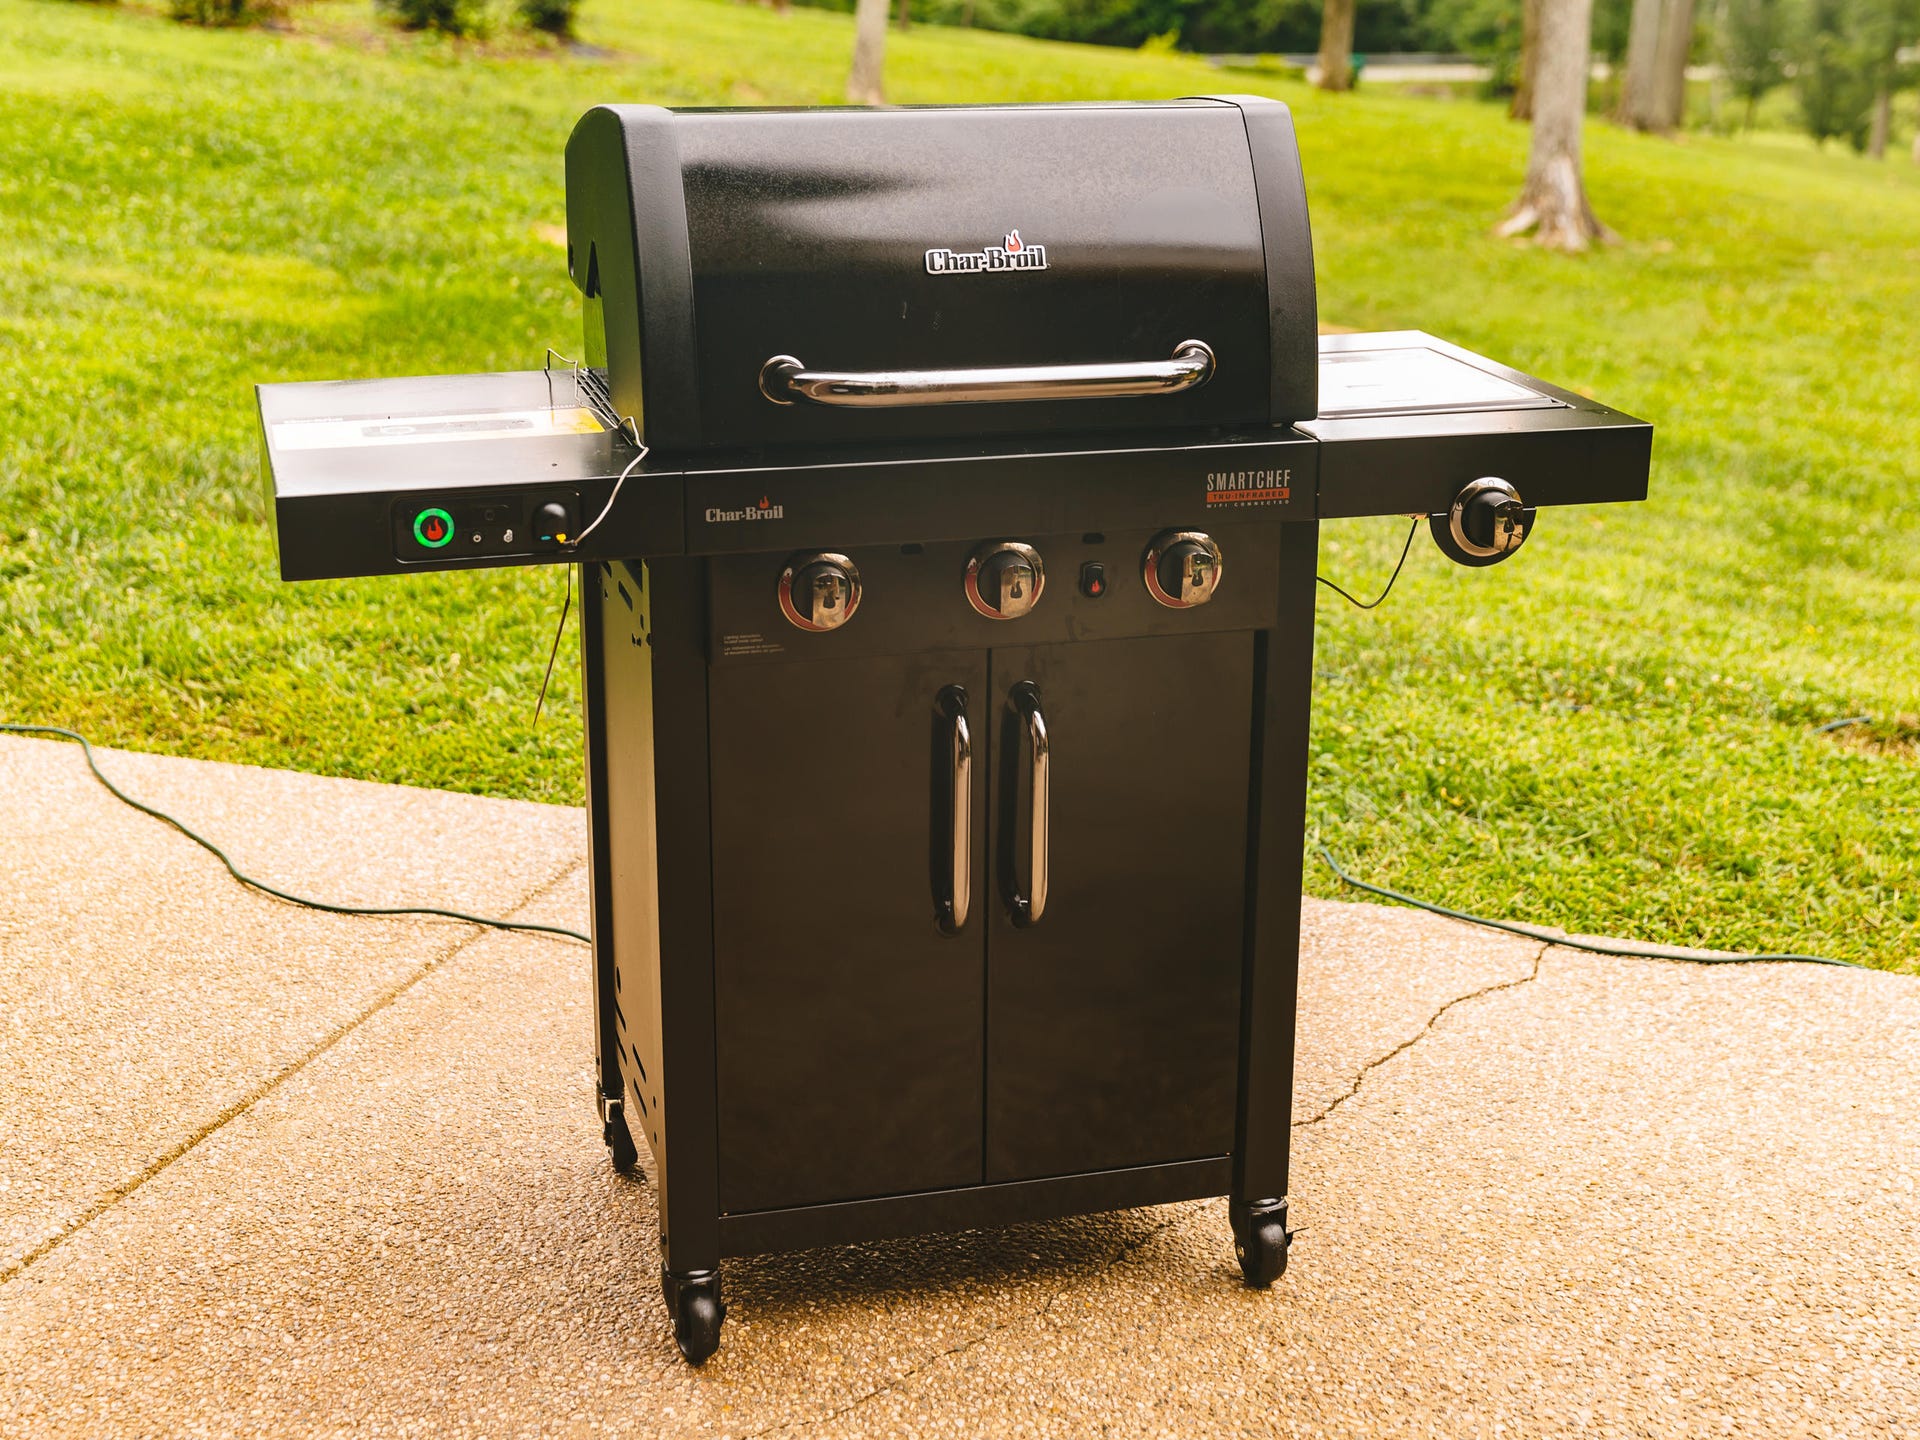 The Char-Broil SmartChef uses an app, grills tasty food - CNET